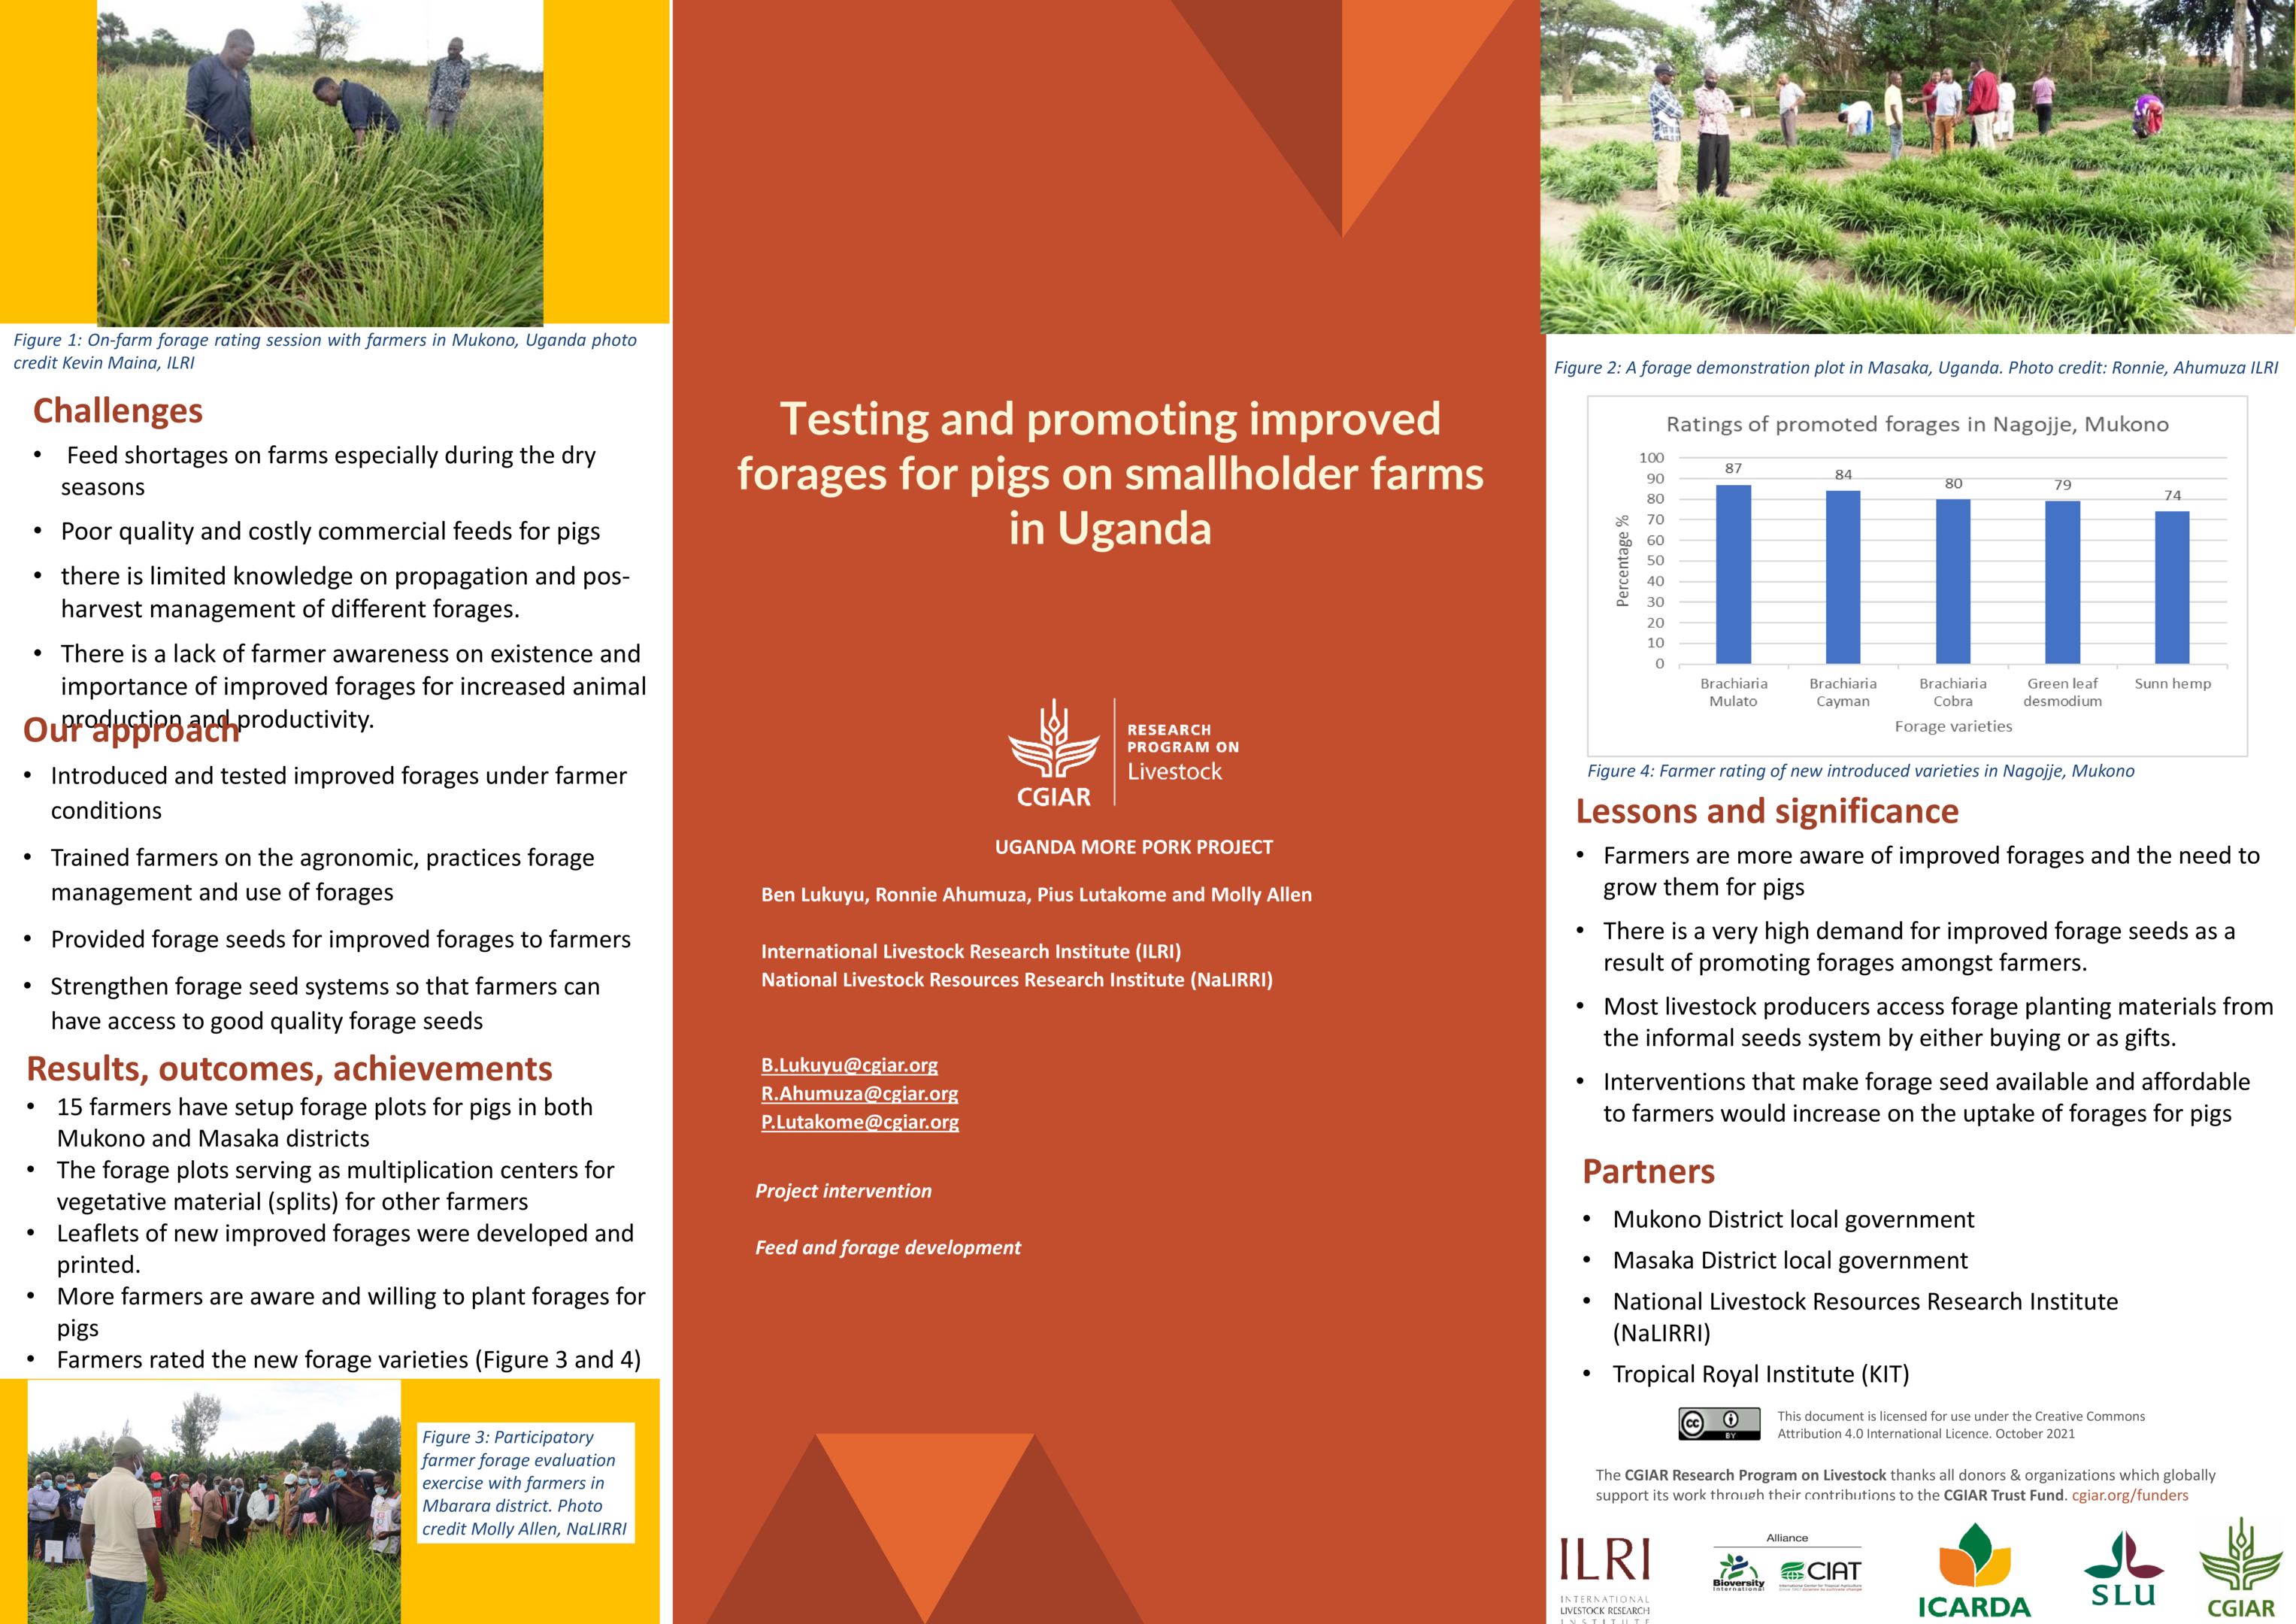 6. Testing and promoting improved forages for pigs on smallholder farms in Uganda 